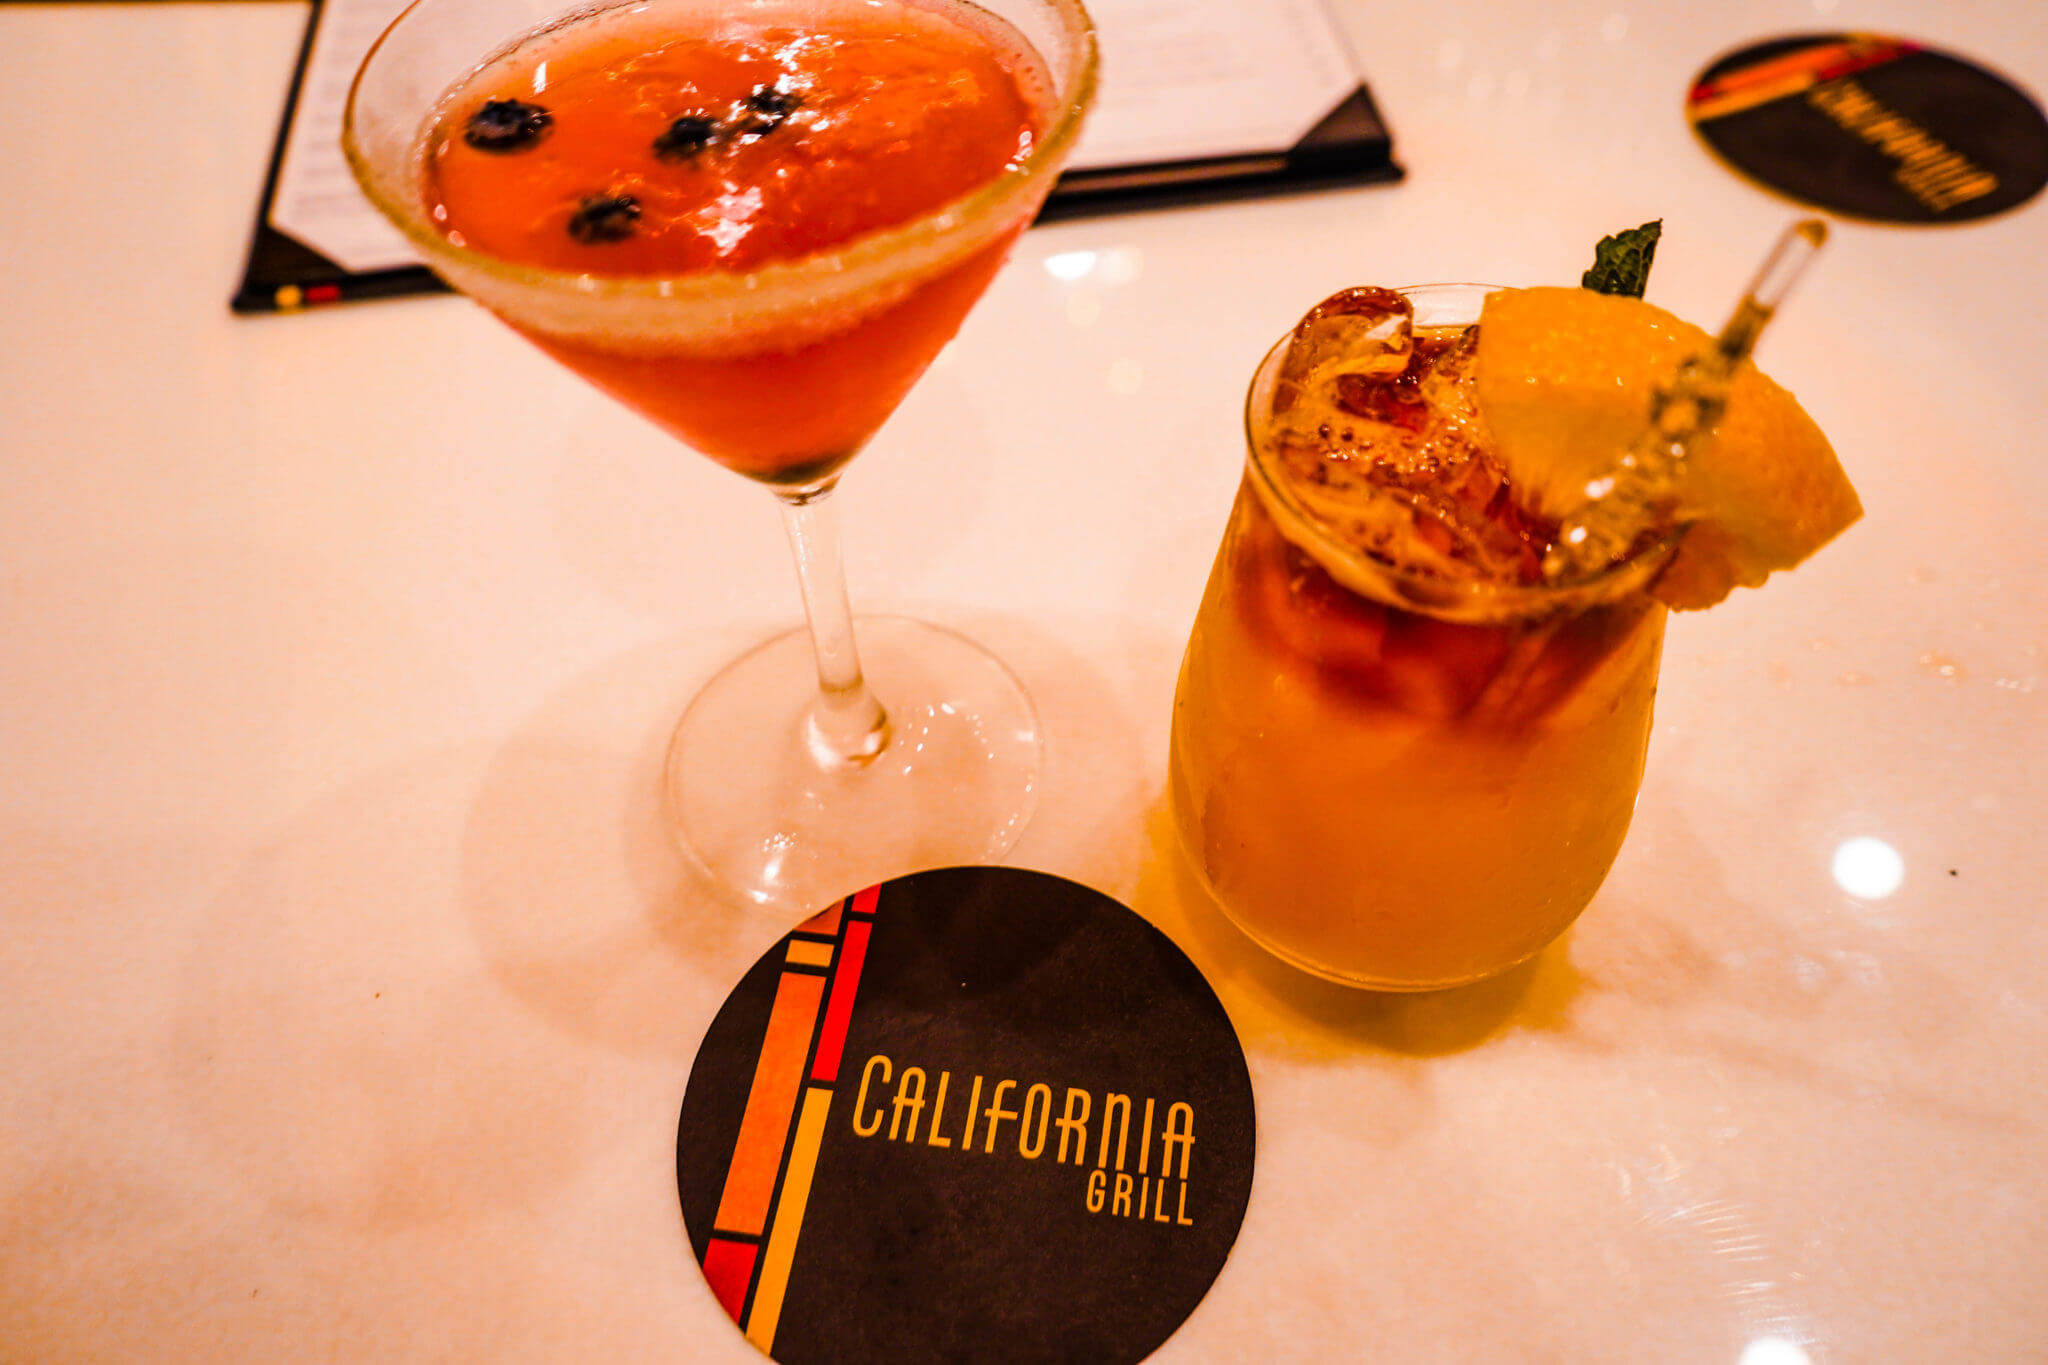 California Grill Blueberry Martini and Coaster The Contemporary at Disney World